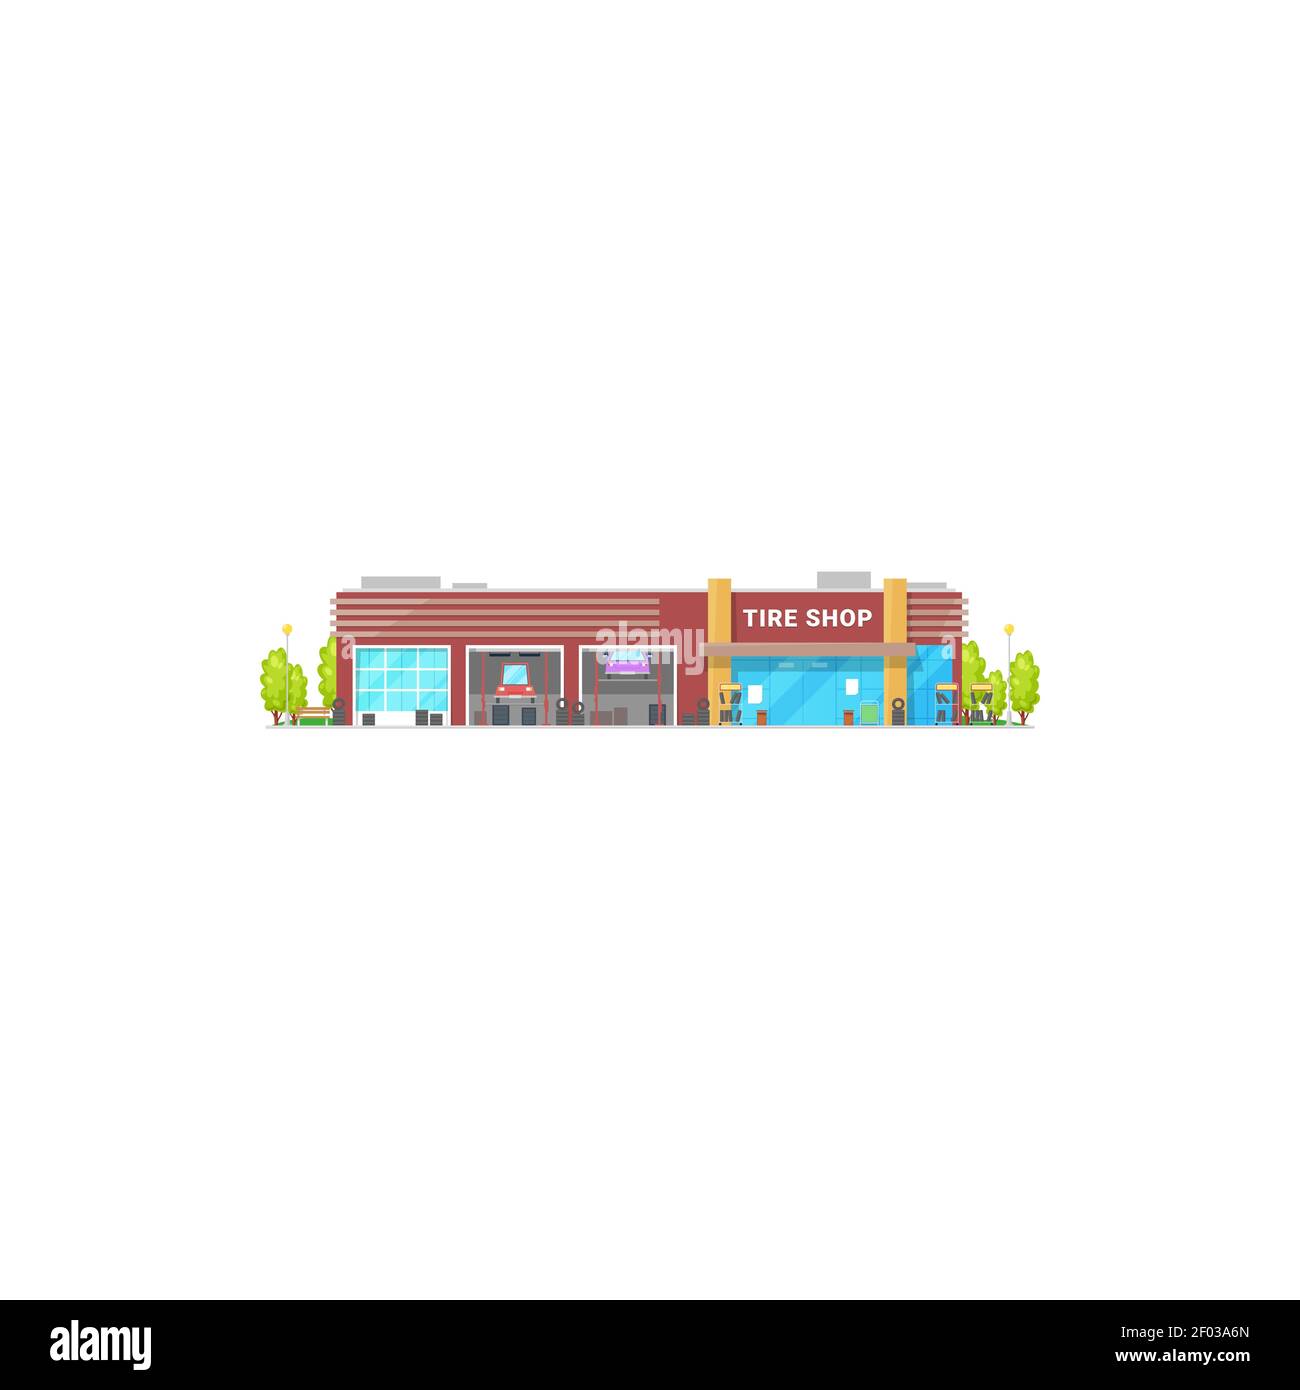 Car showroom exterior Stock Vector Images - Alamy